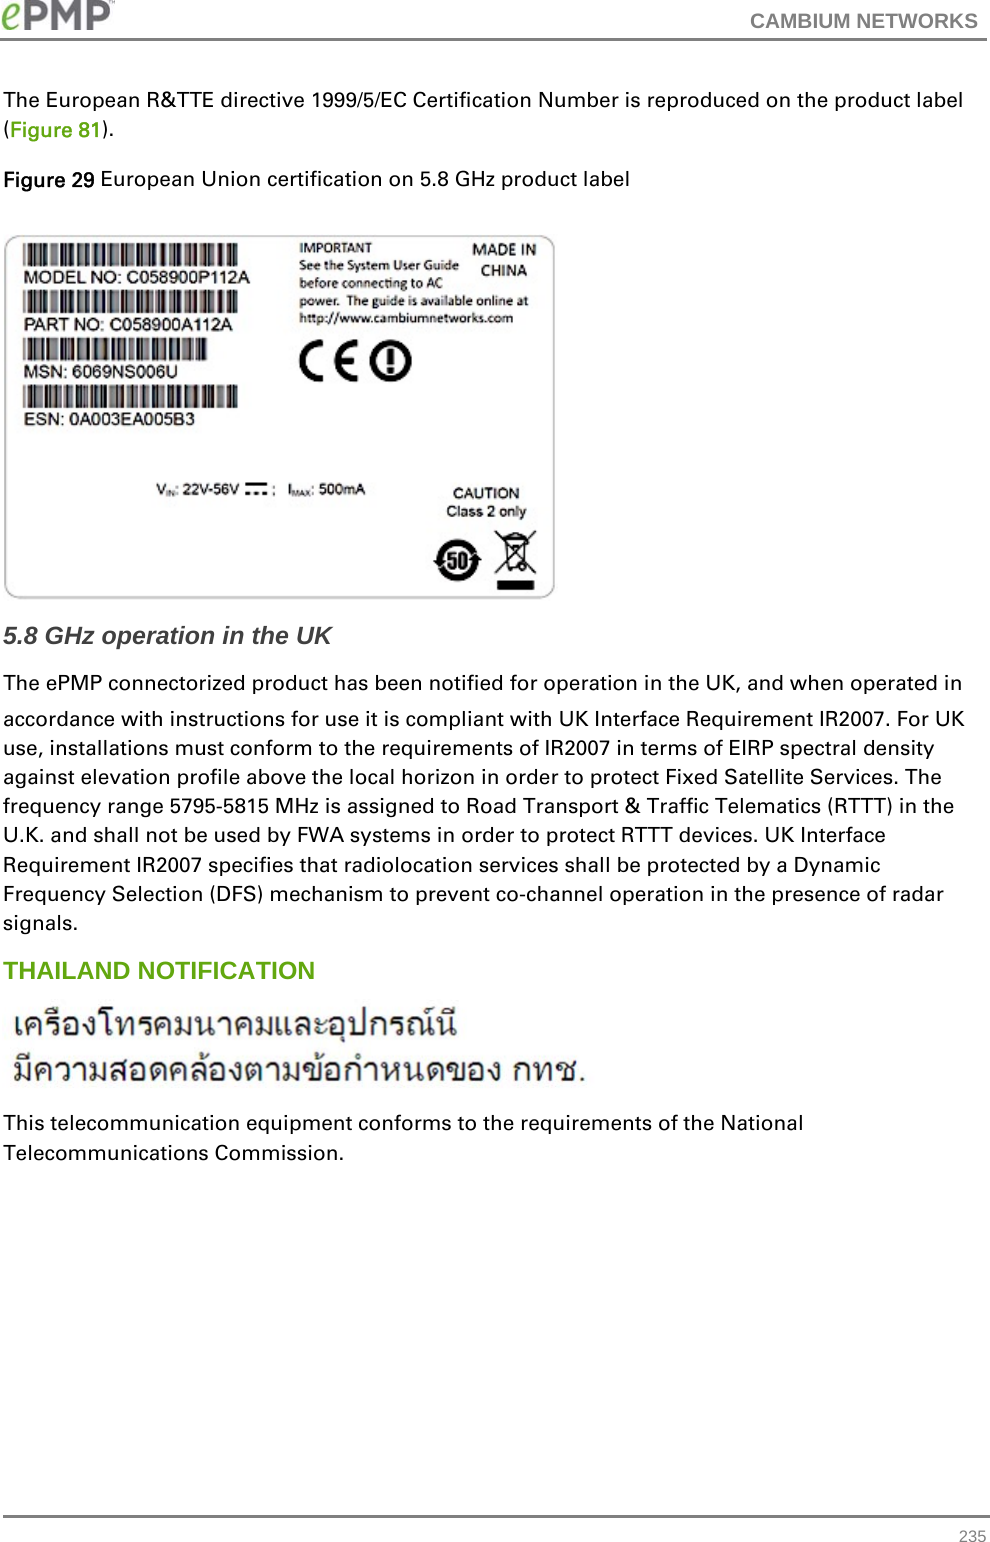 CAMBIUM NETWORKS   235The European R&amp;TTE directive 1999/5/EC Certification Number is reproduced on the product label (Figure 81). Figure 29 European Union certification on 5.8 GHz product label   5.8 GHz operation in the UK The ePMP connectorized product has been notified for operation in the UK, and when operated in  accordance with instructions for use it is compliant with UK Interface Requirement IR2007. For UK use, installations must conform to the requirements of IR2007 in terms of EIRP spectral density against elevation profile above the local horizon in order to protect Fixed Satellite Services. The frequency range 5795-5815 MHz is assigned to Road Transport &amp; Traffic Telematics (RTTT) in the U.K. and shall not be used by FWA systems in order to protect RTTT devices. UK Interface Requirement IR2007 specifies that radiolocation services shall be protected by a Dynamic Frequency Selection (DFS) mechanism to prevent co-channel operation in the presence of radar signals. THAILAND NOTIFICATION  This telecommunication equipment conforms to the requirements of the National Telecommunications Commission.  